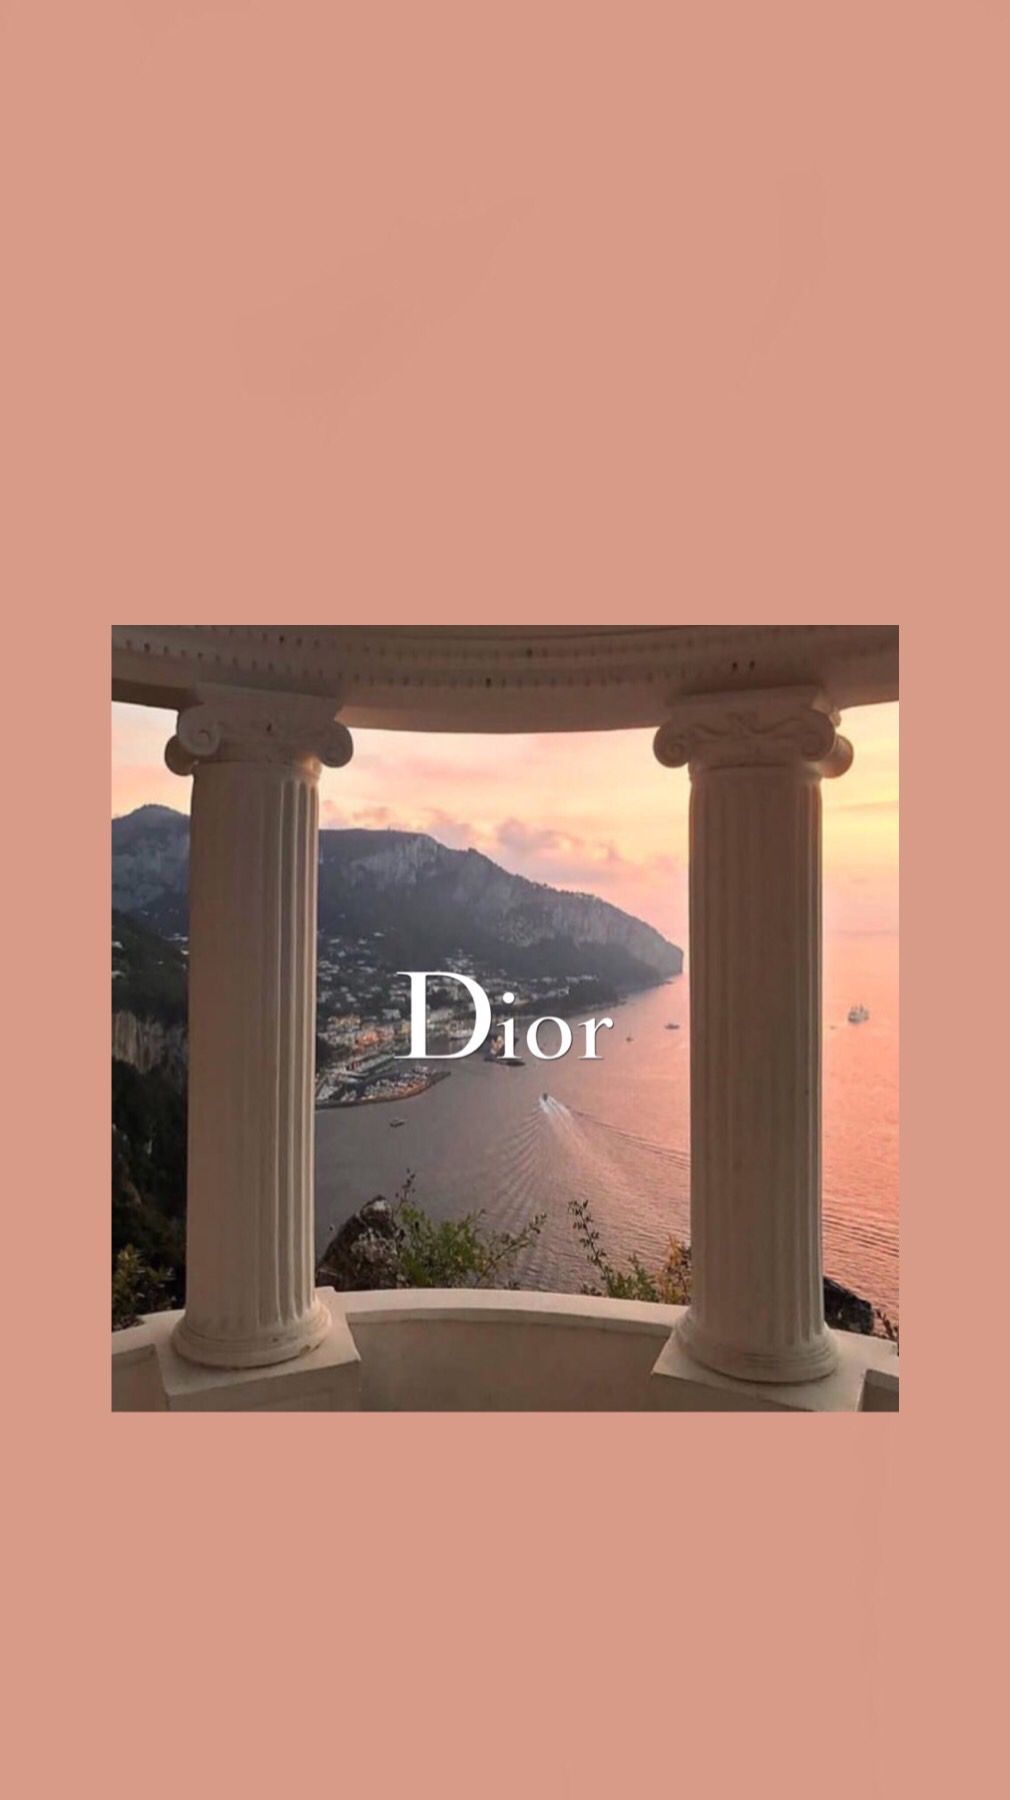 A photo of the dior logo on top - Dior